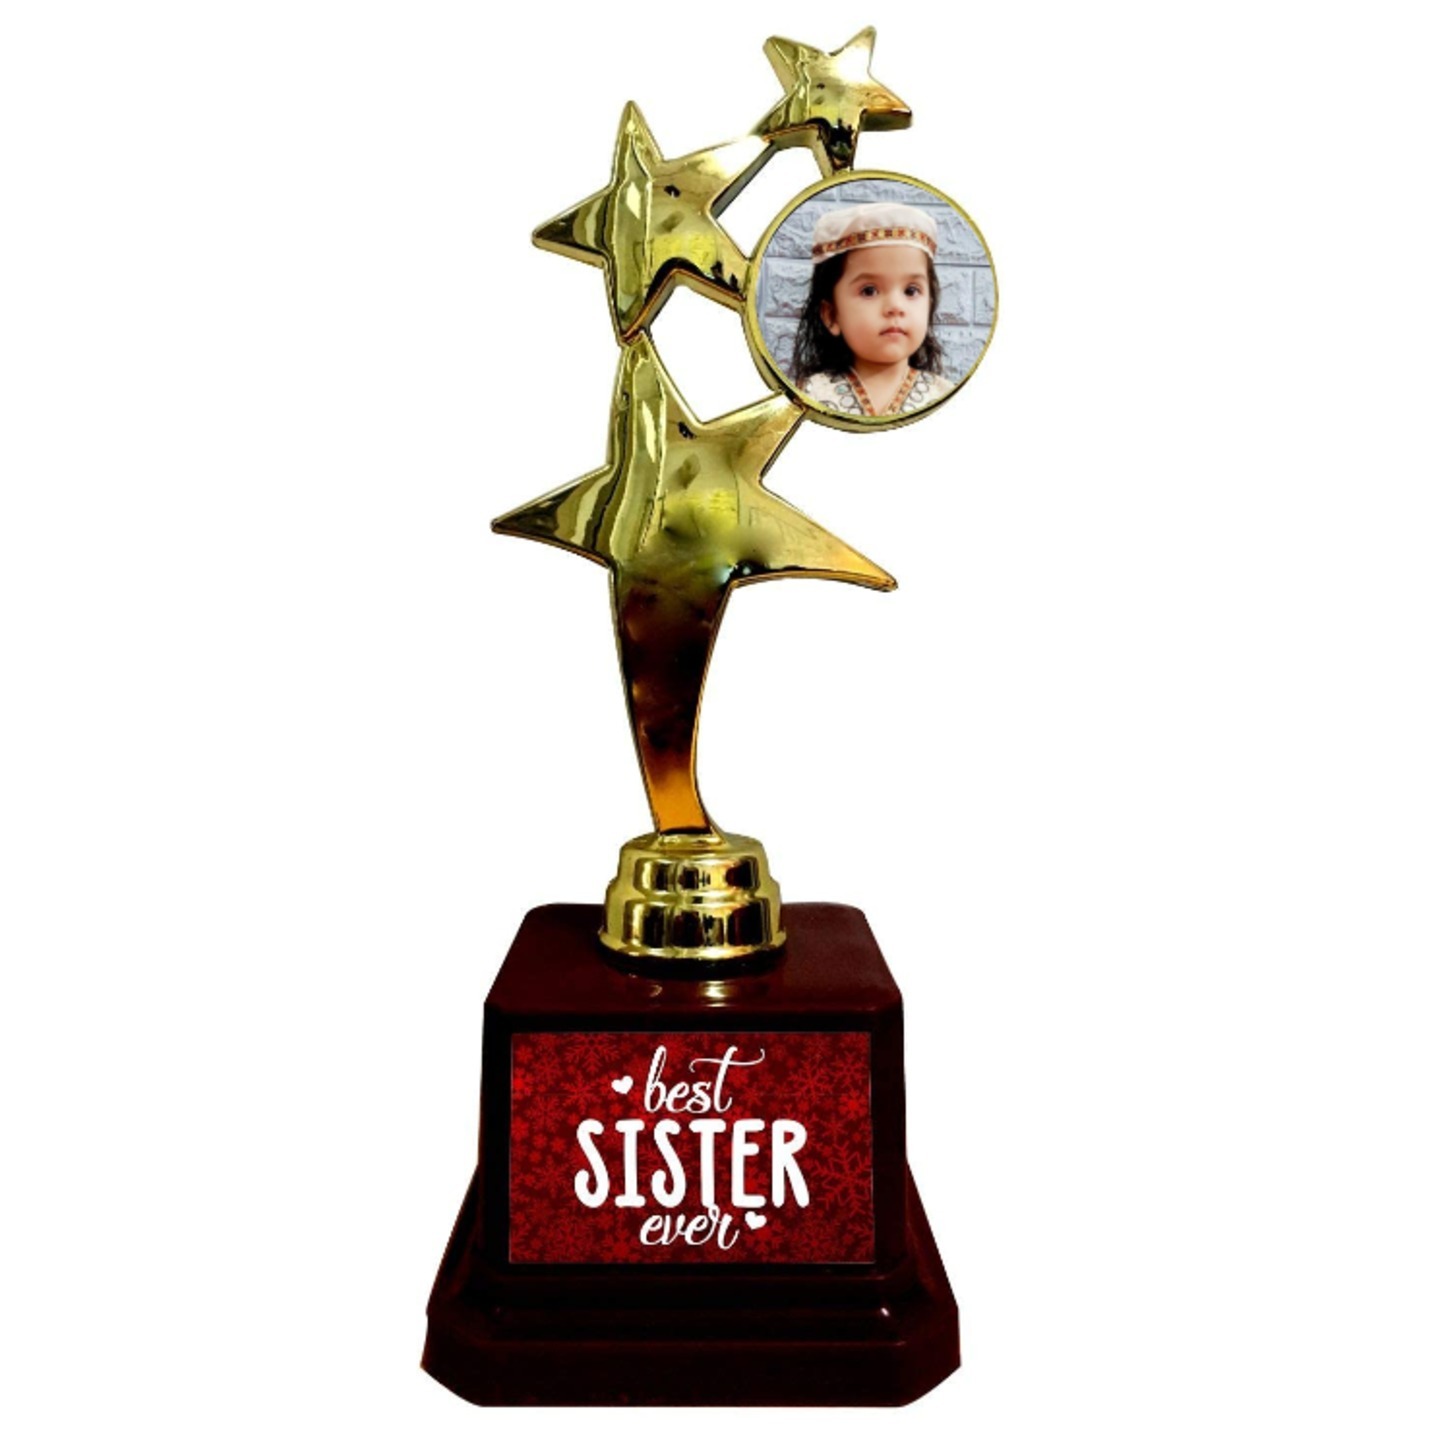 Customized Trophy with your message & photo